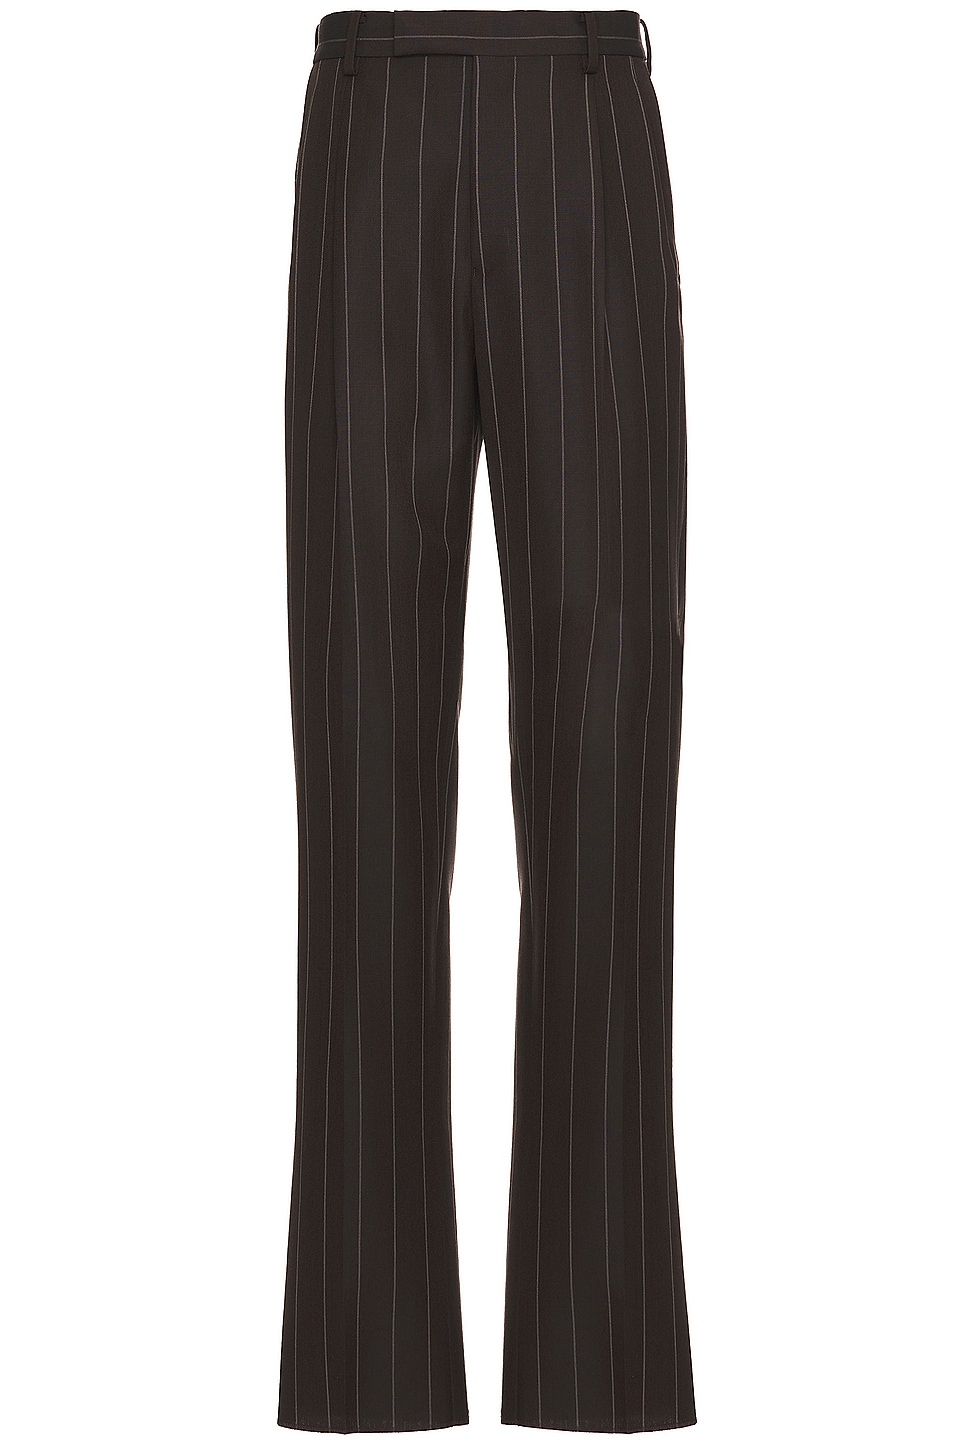 Image 1 of WACKO MARIA Double Pleated Trousers in Brown